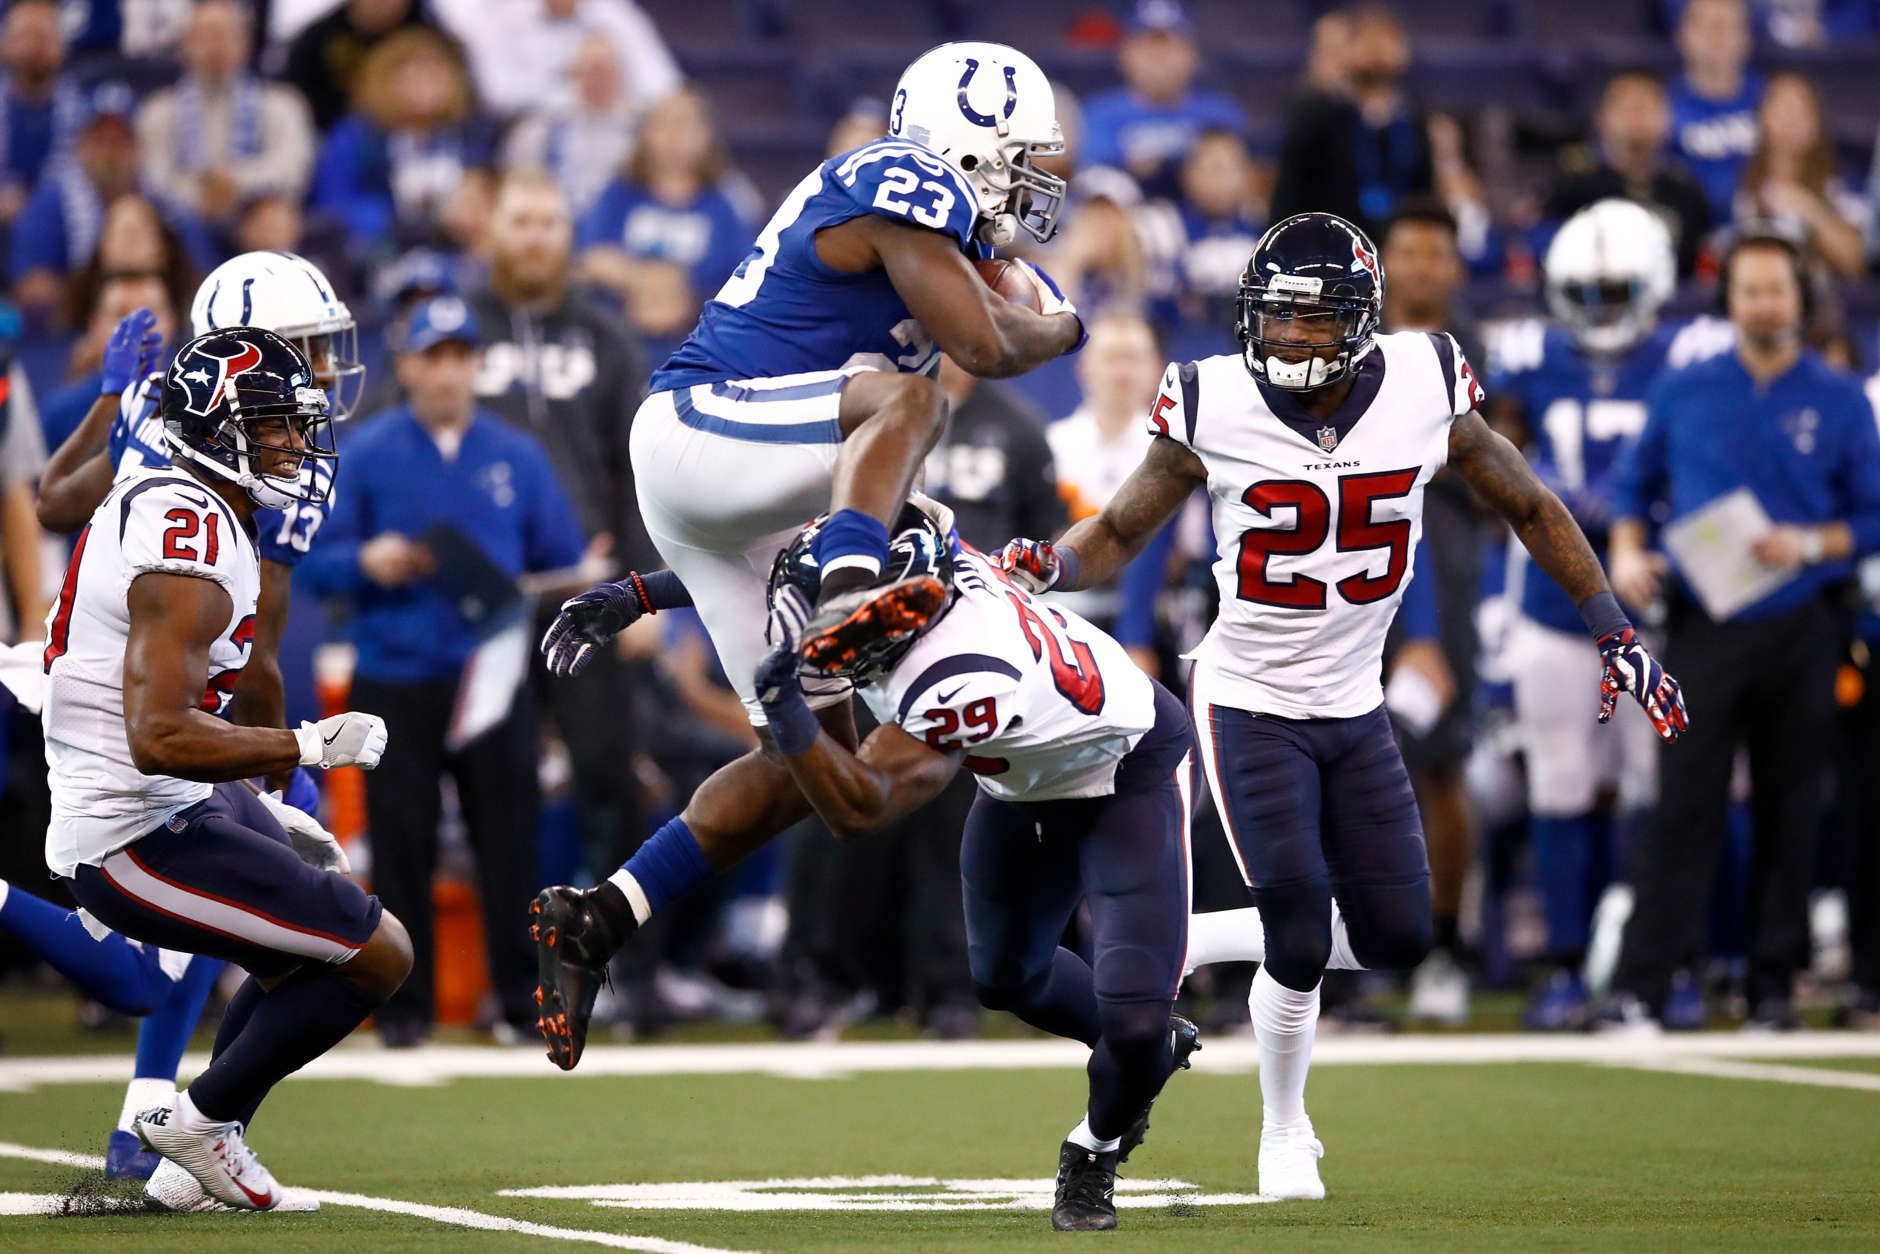 INDIANAPOLIS, IN - DECEMBER 31:  Frank Gore #23 of the Indianapolis Colts jumps over Andre Hal #29 of the Houston Texans during the second half at Lucas Oil Stadium on December 31, 2017 in Indianapolis, Indiana.  (Photo by Andy Lyons/Getty Images)